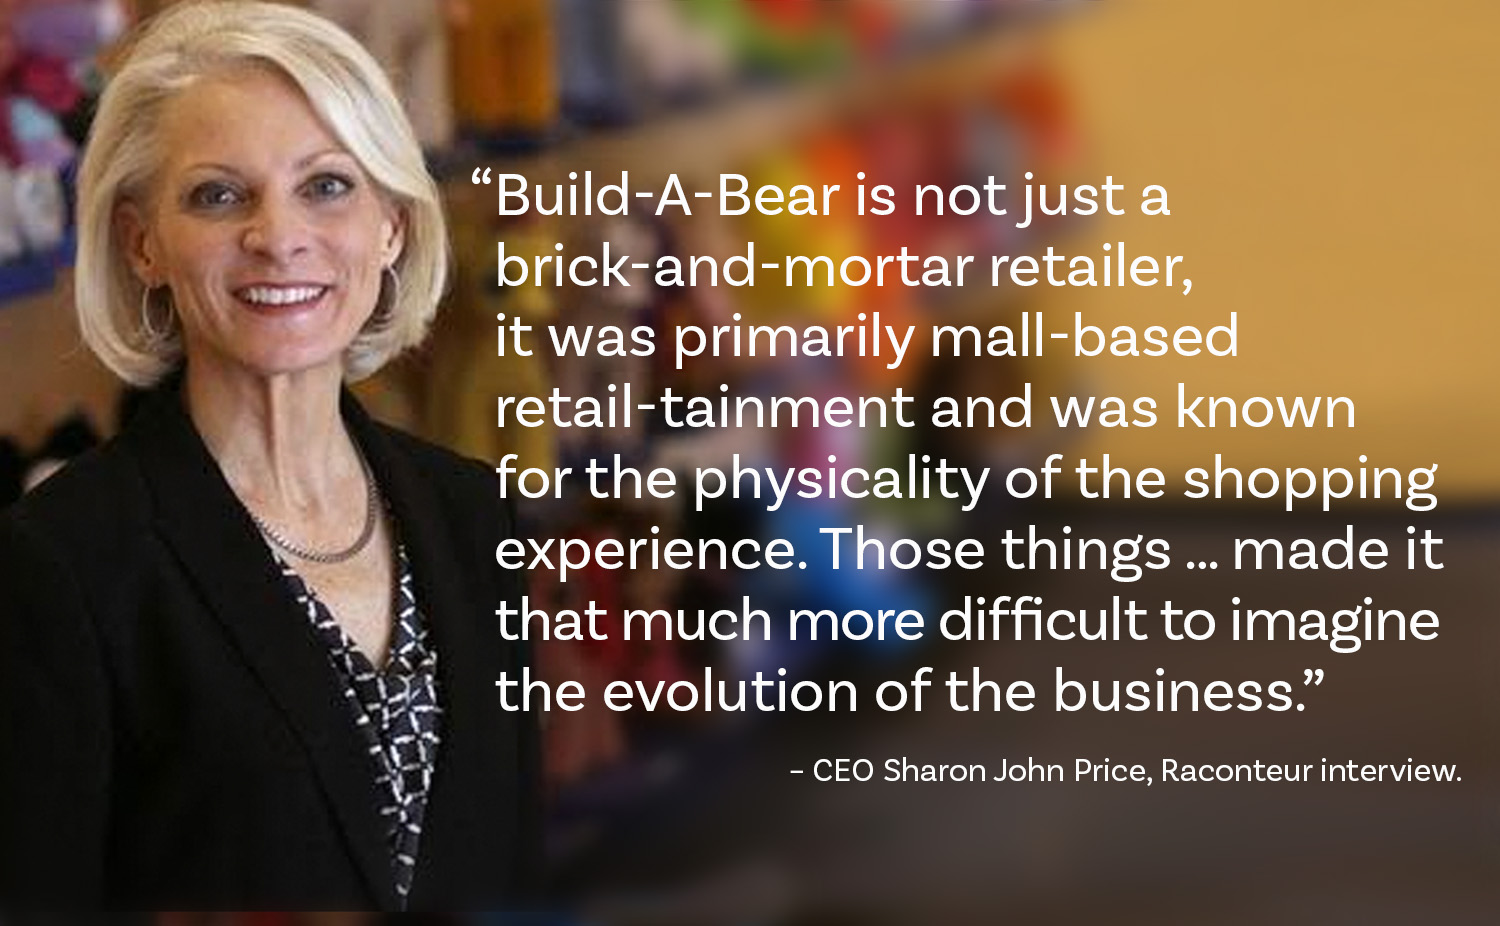 Build-A-Bear CEO Sharon John Price and quote from Raconteur interview